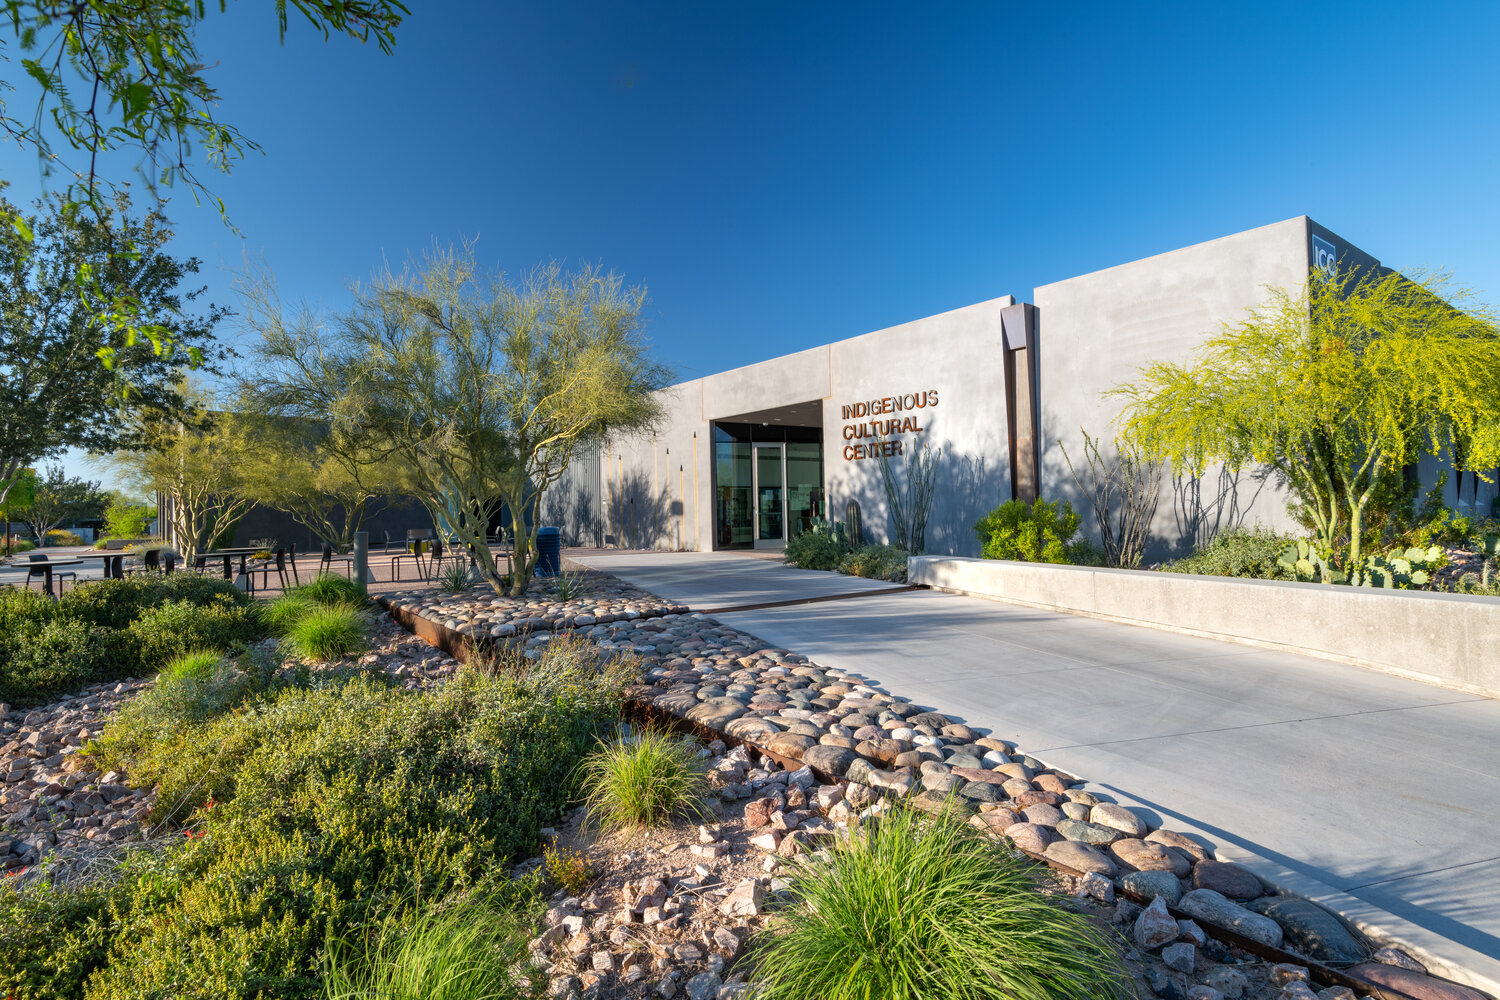 Scottsdale Community College is the new home of SUSD’s Special Education SCORE program, which provides vocational training opportunities to young adults with disabilities up to the age of 22.